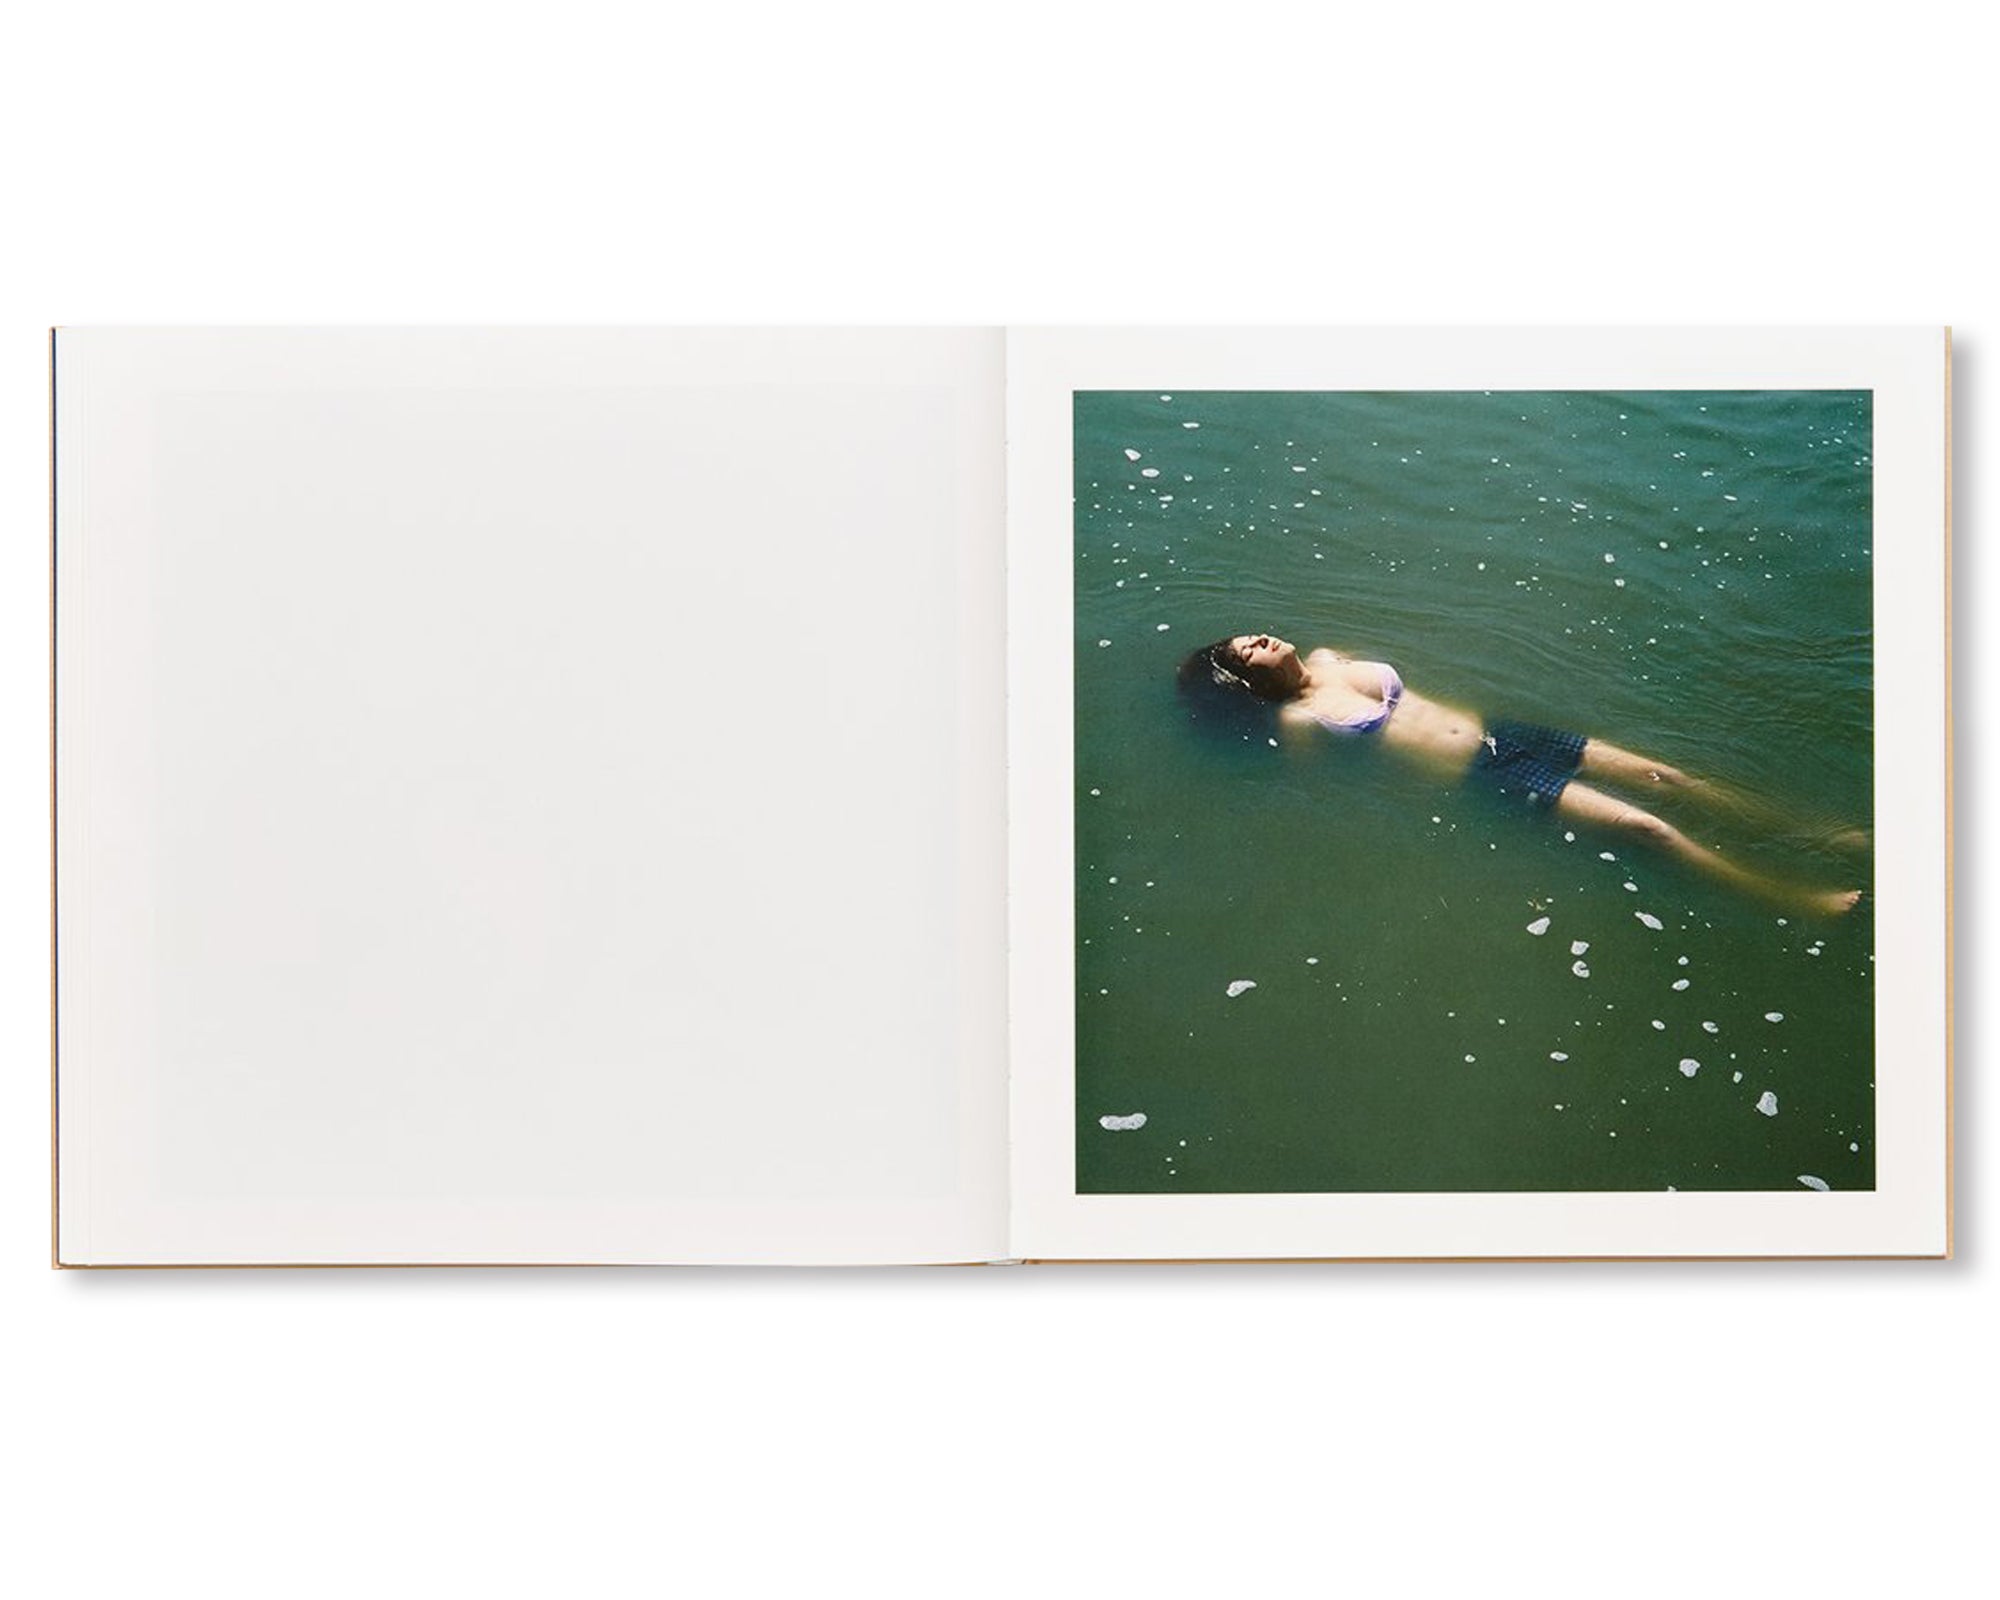 THE ADVENTURES OF GUILLE AND BELINDA AND THE ILLUSION OF AN EVERLASTING SUMMER by Alessandra Sanguinetti [DIRECT SIGNED]